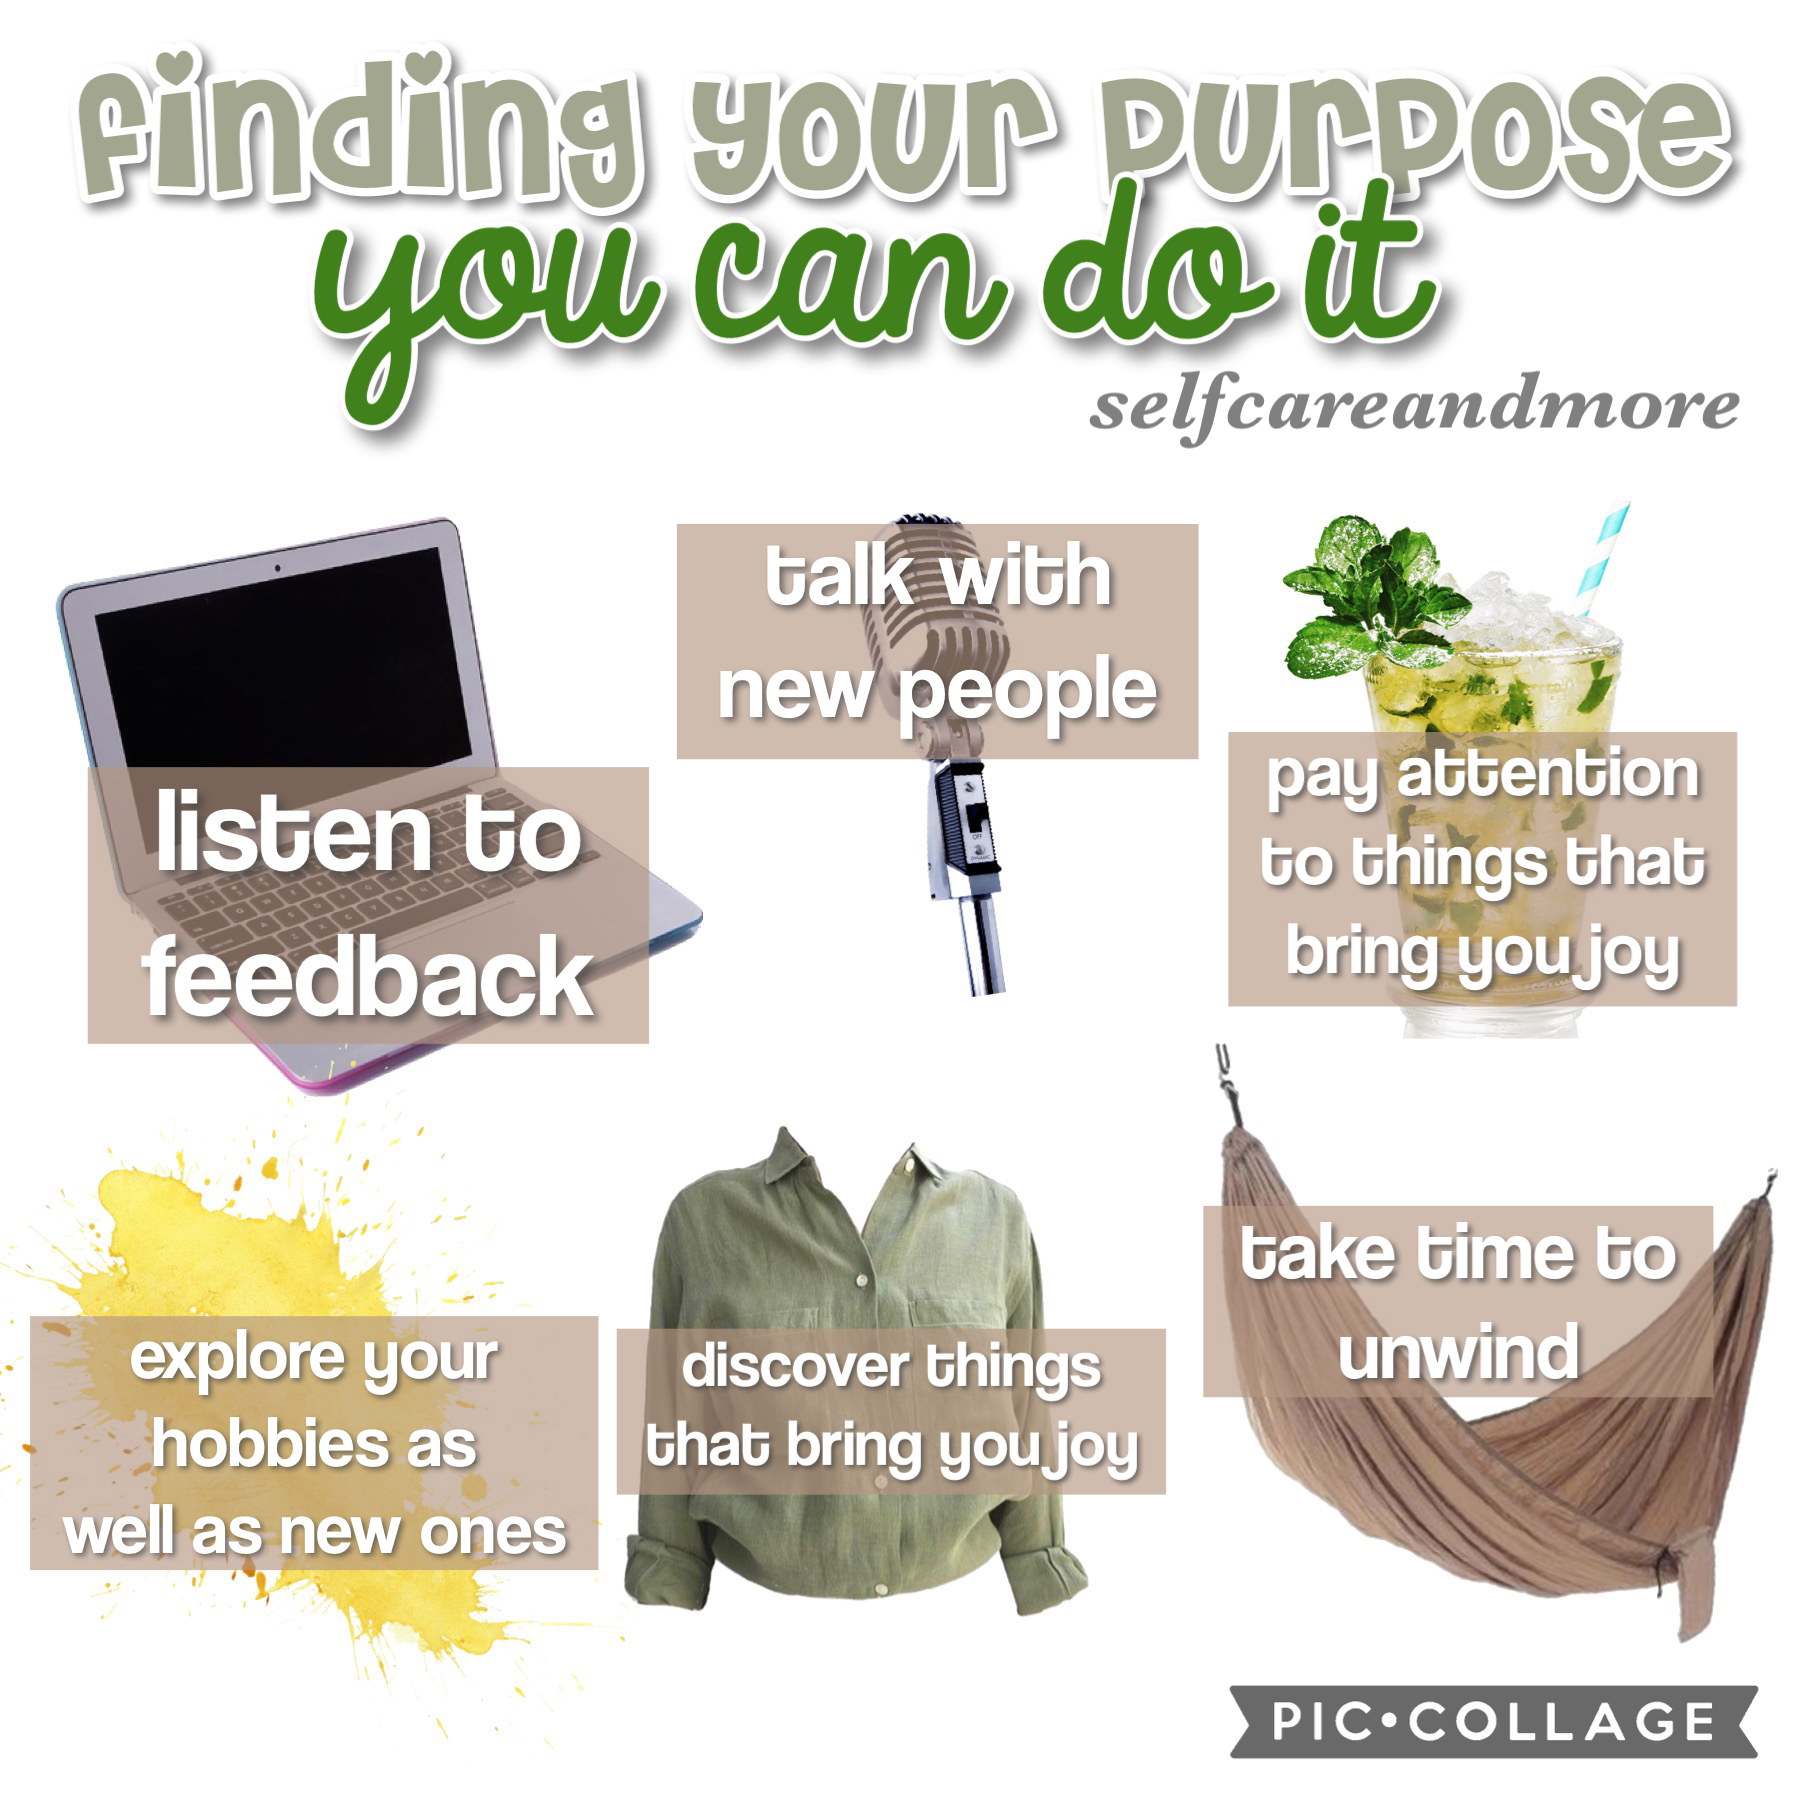 💓tappers💓
If you don’t find your
purpose soon, it’s okay.
If you aren’t sure about
what you love, it’s okay.
You are going to 
discover something you
love and are passionate 
about. 
💓 💓 💓 